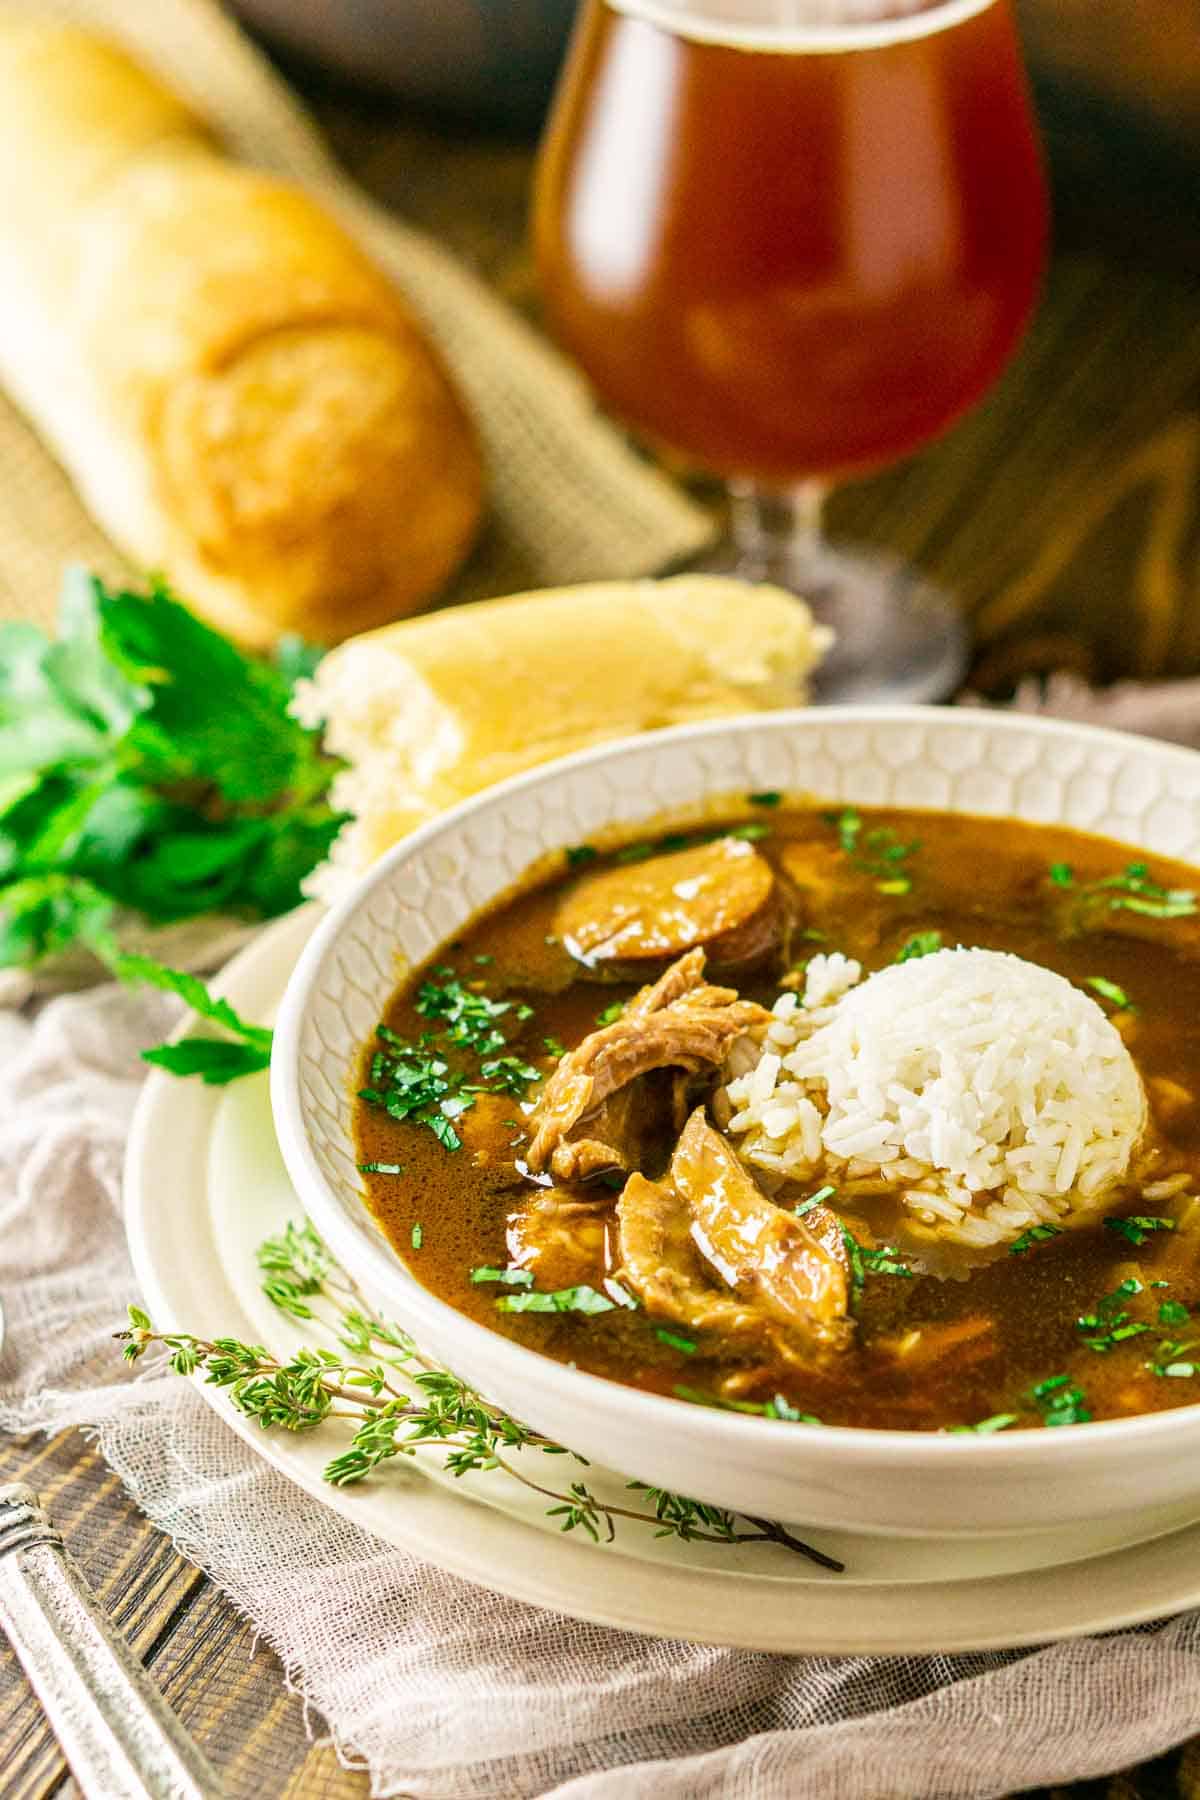 The duck gumbo on a plate with a beer and loaf of bread in the background.